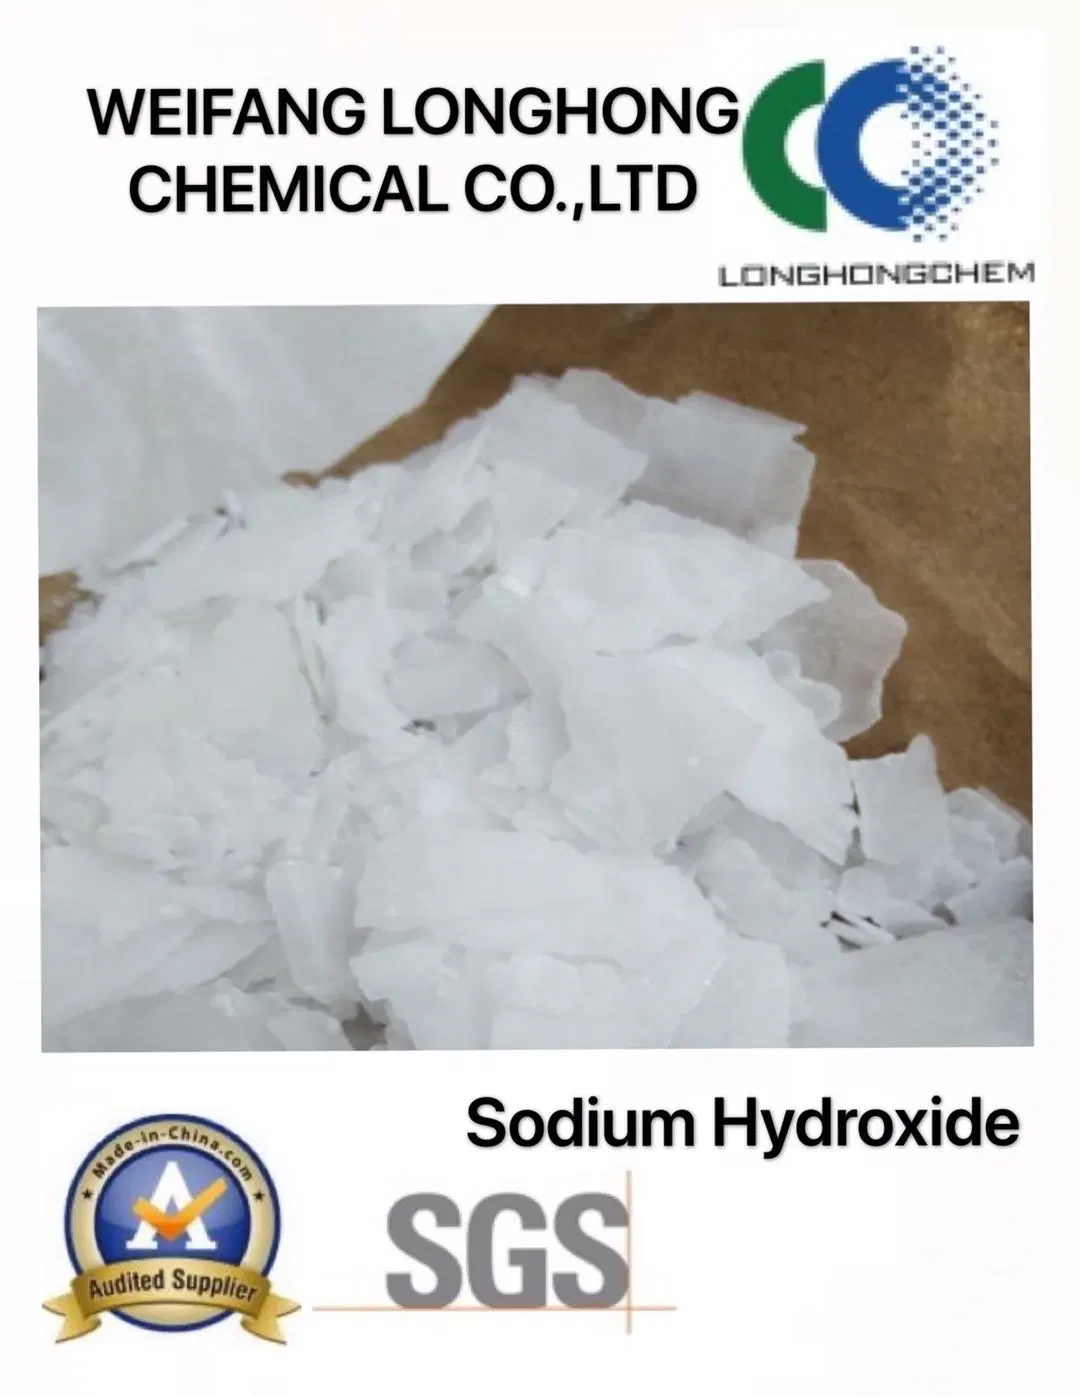 Sodium Hydroxide Is Mainly Used in Paper Making and Soap